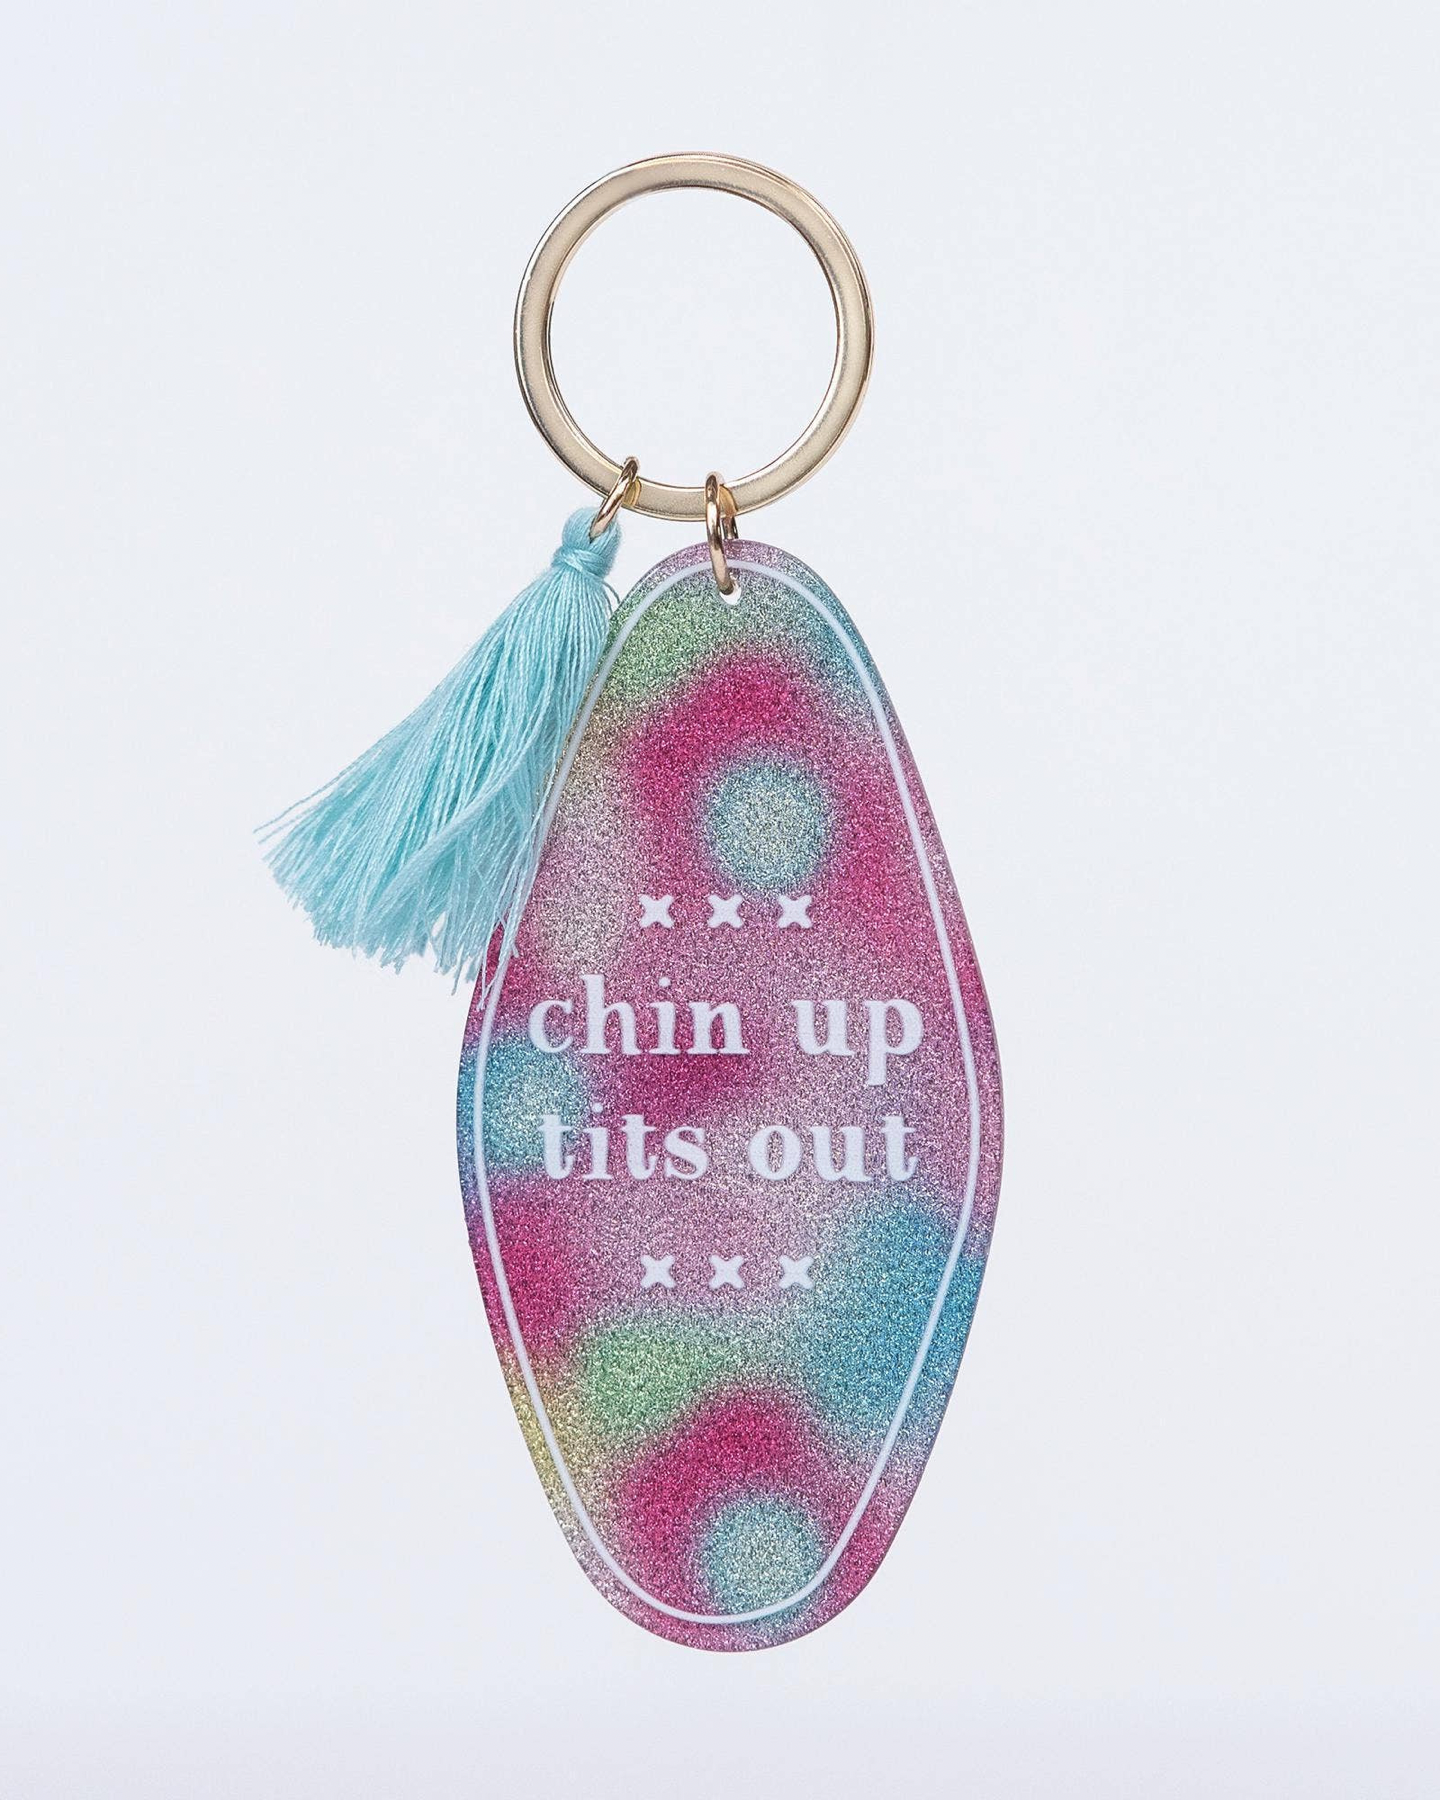 Chin Up Tits Out Motel Keychain